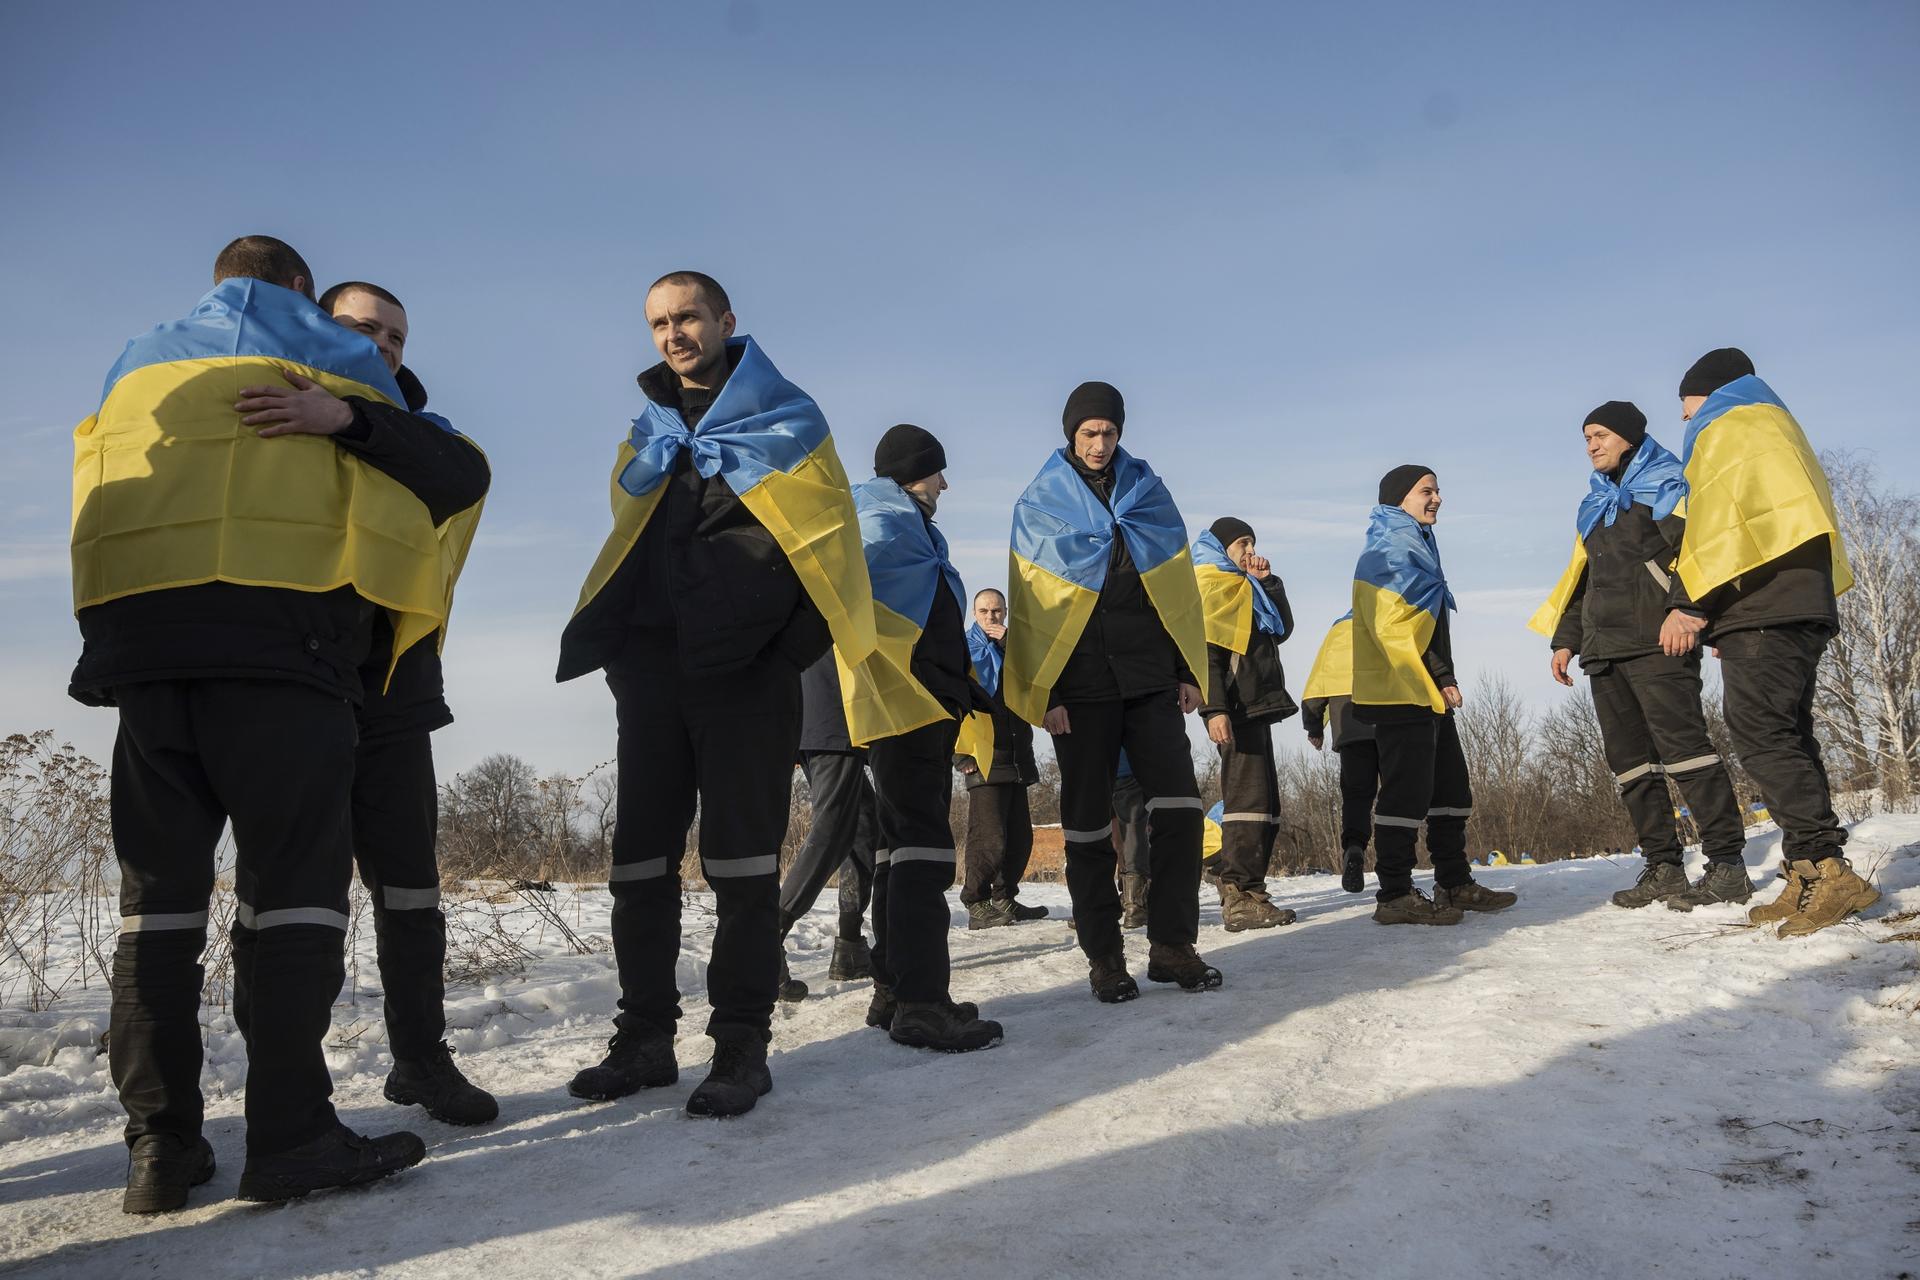 A group of men wrapped around the national flag of Ukraine standing in the cold